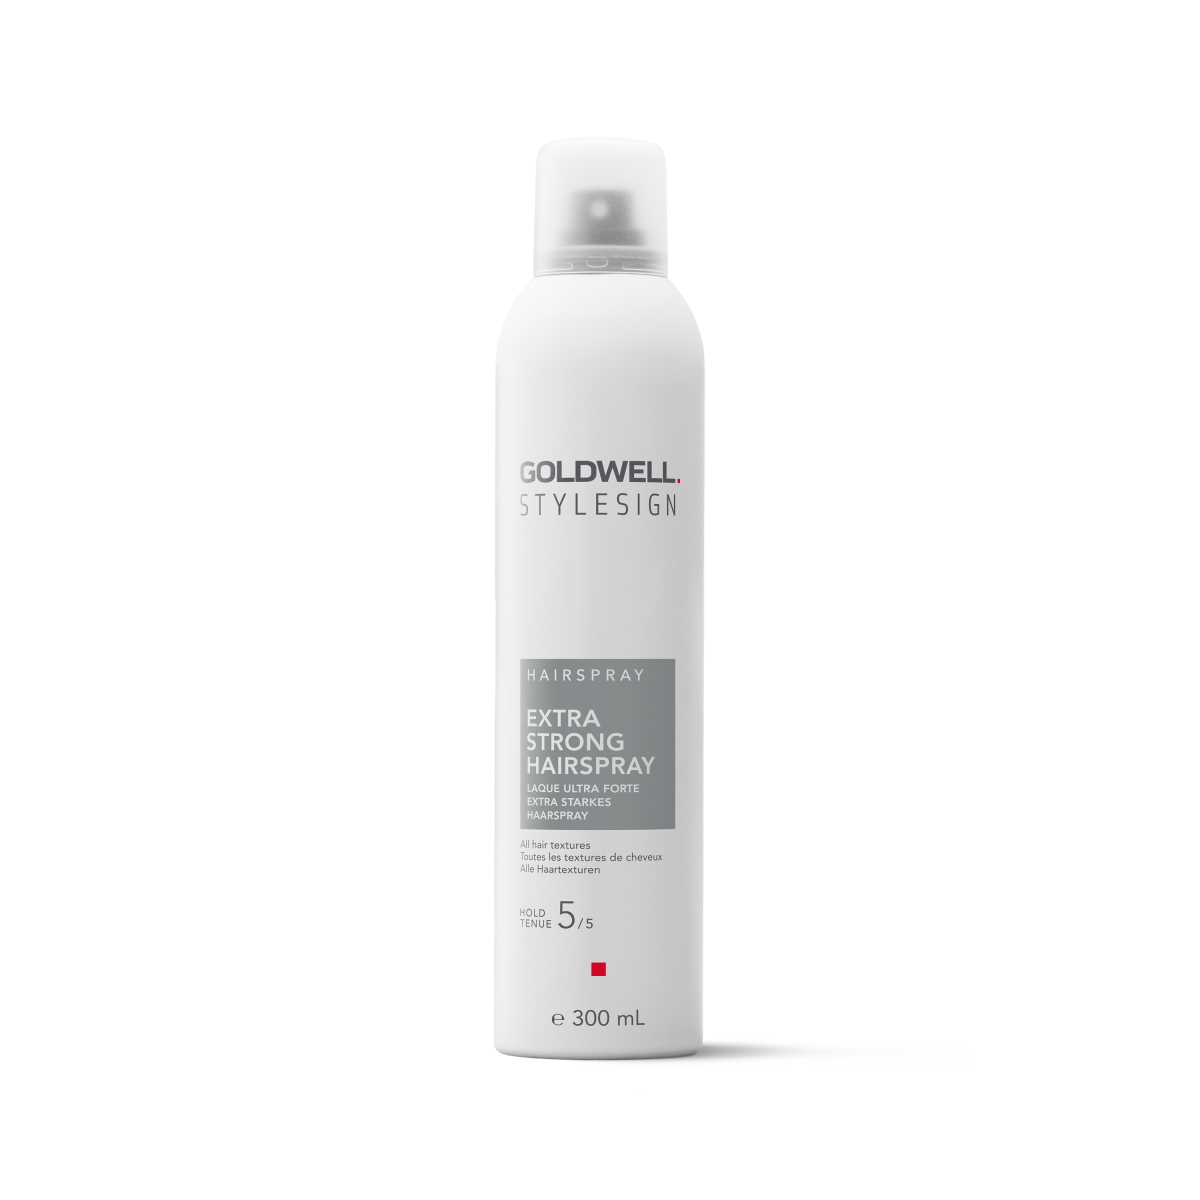 Goldwell Style Sign Hairspray Extra Strong Hairspray 300ml 